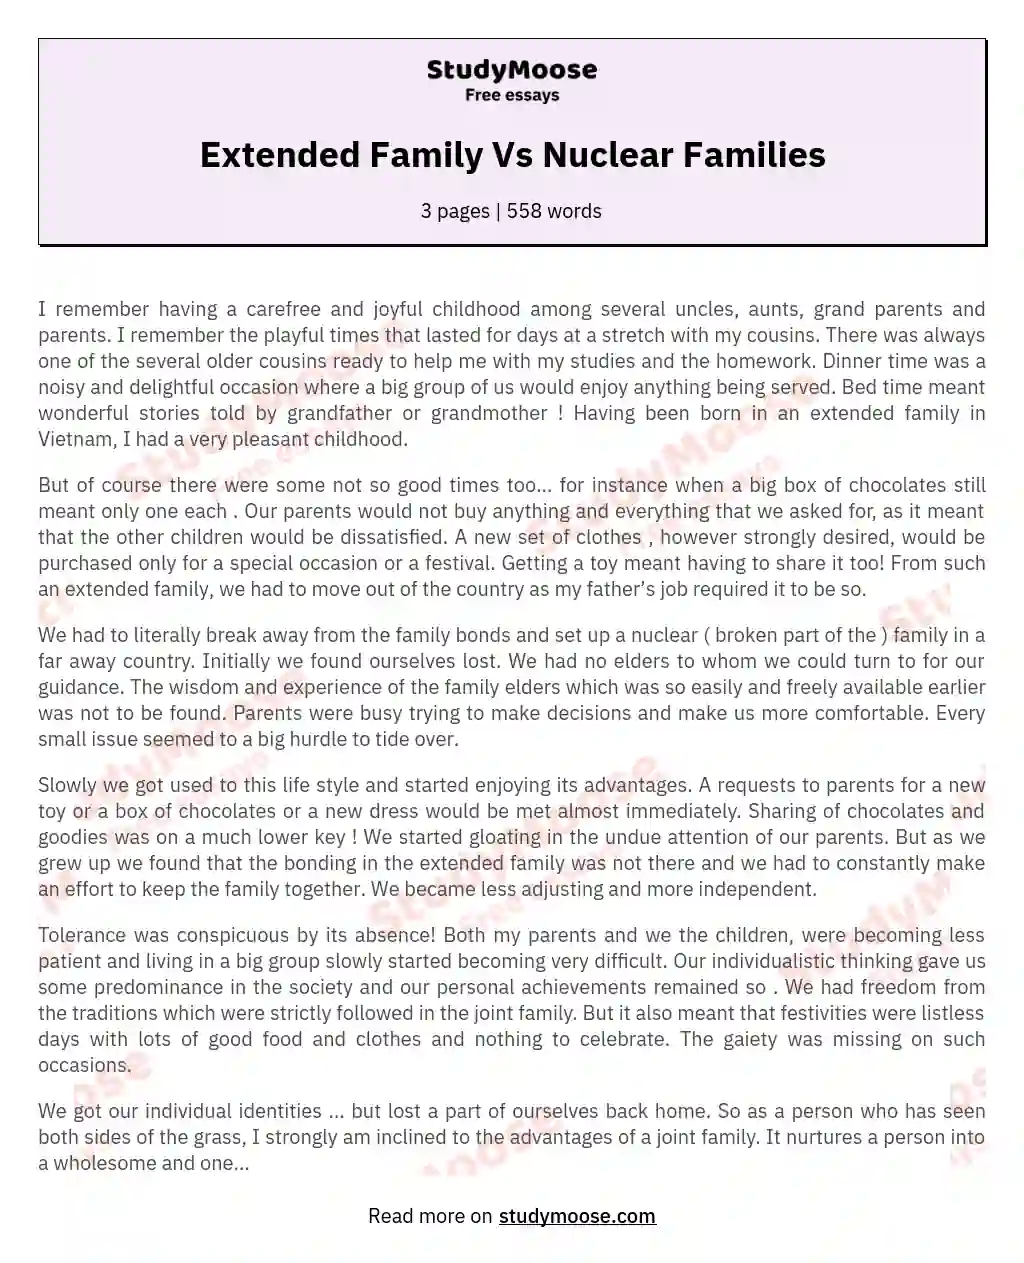 Extended Family Vs Nuclear Families essay